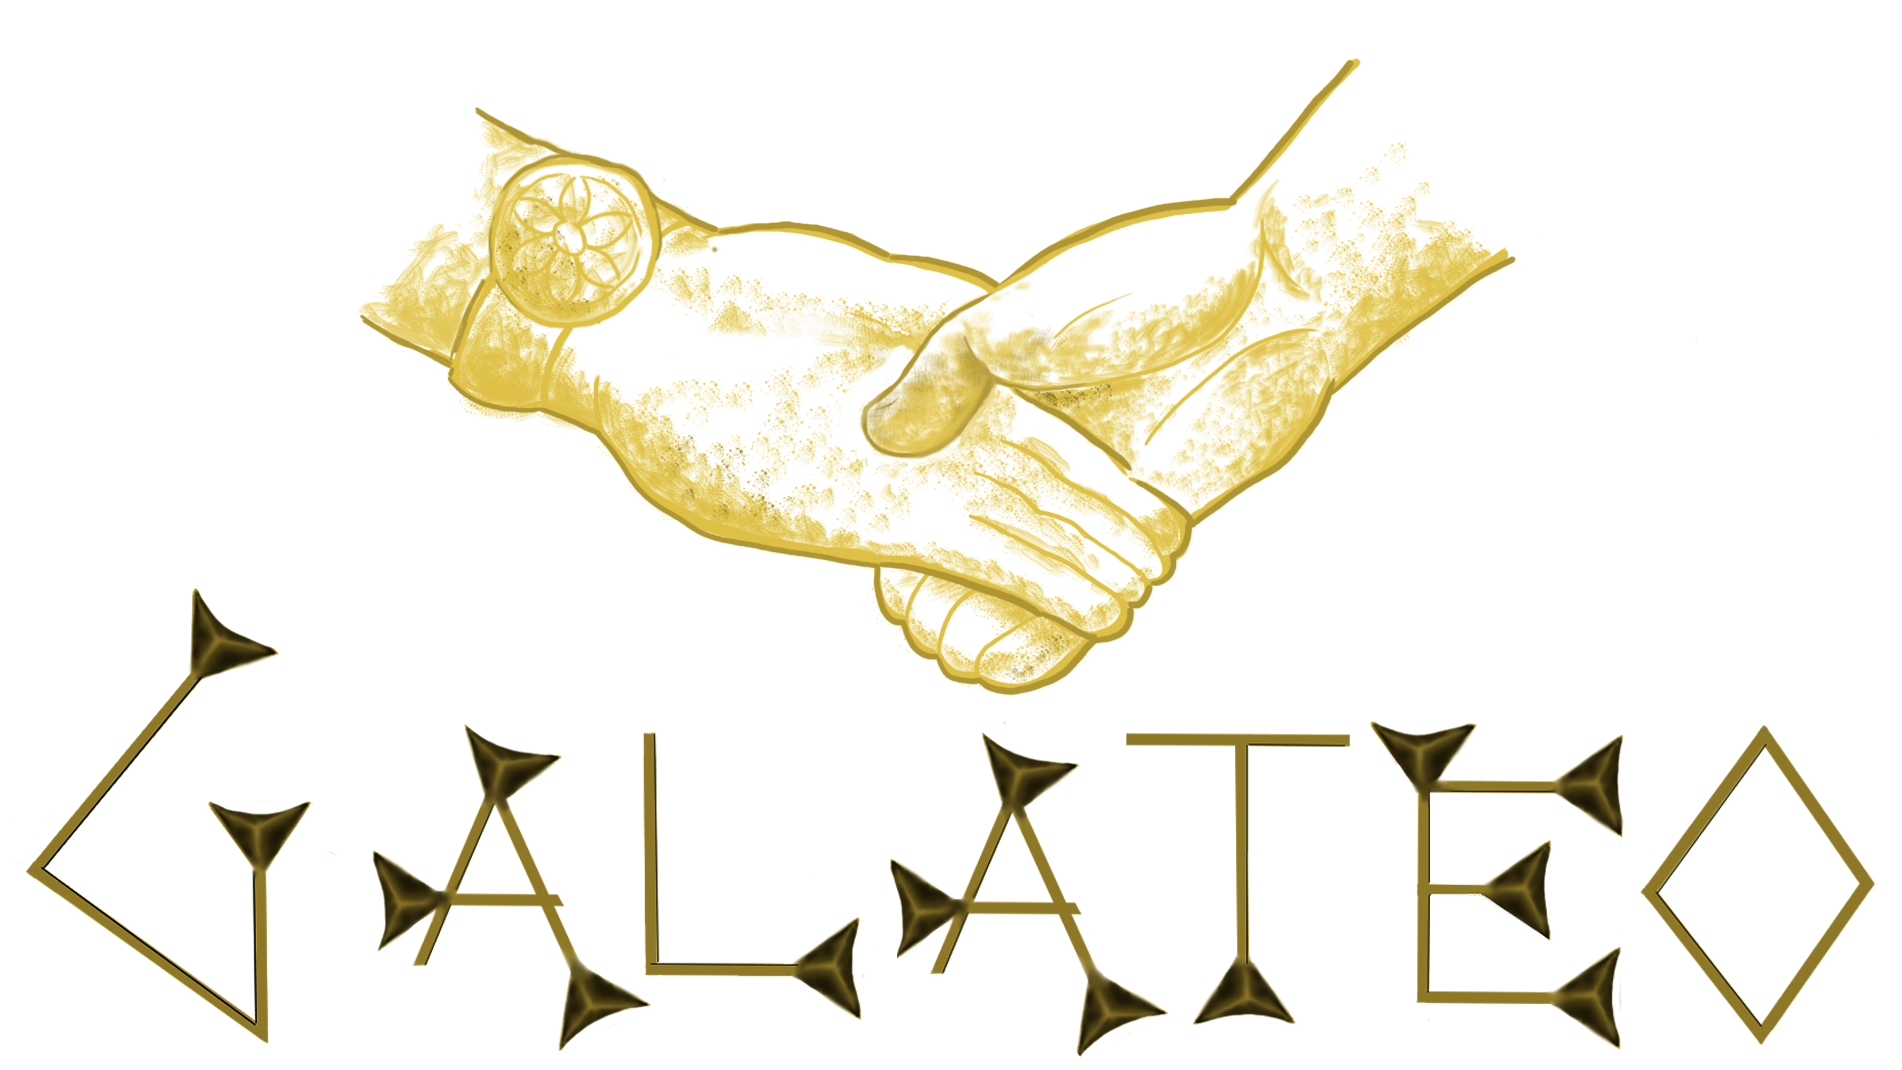 Galateo project logo. Shaking hands